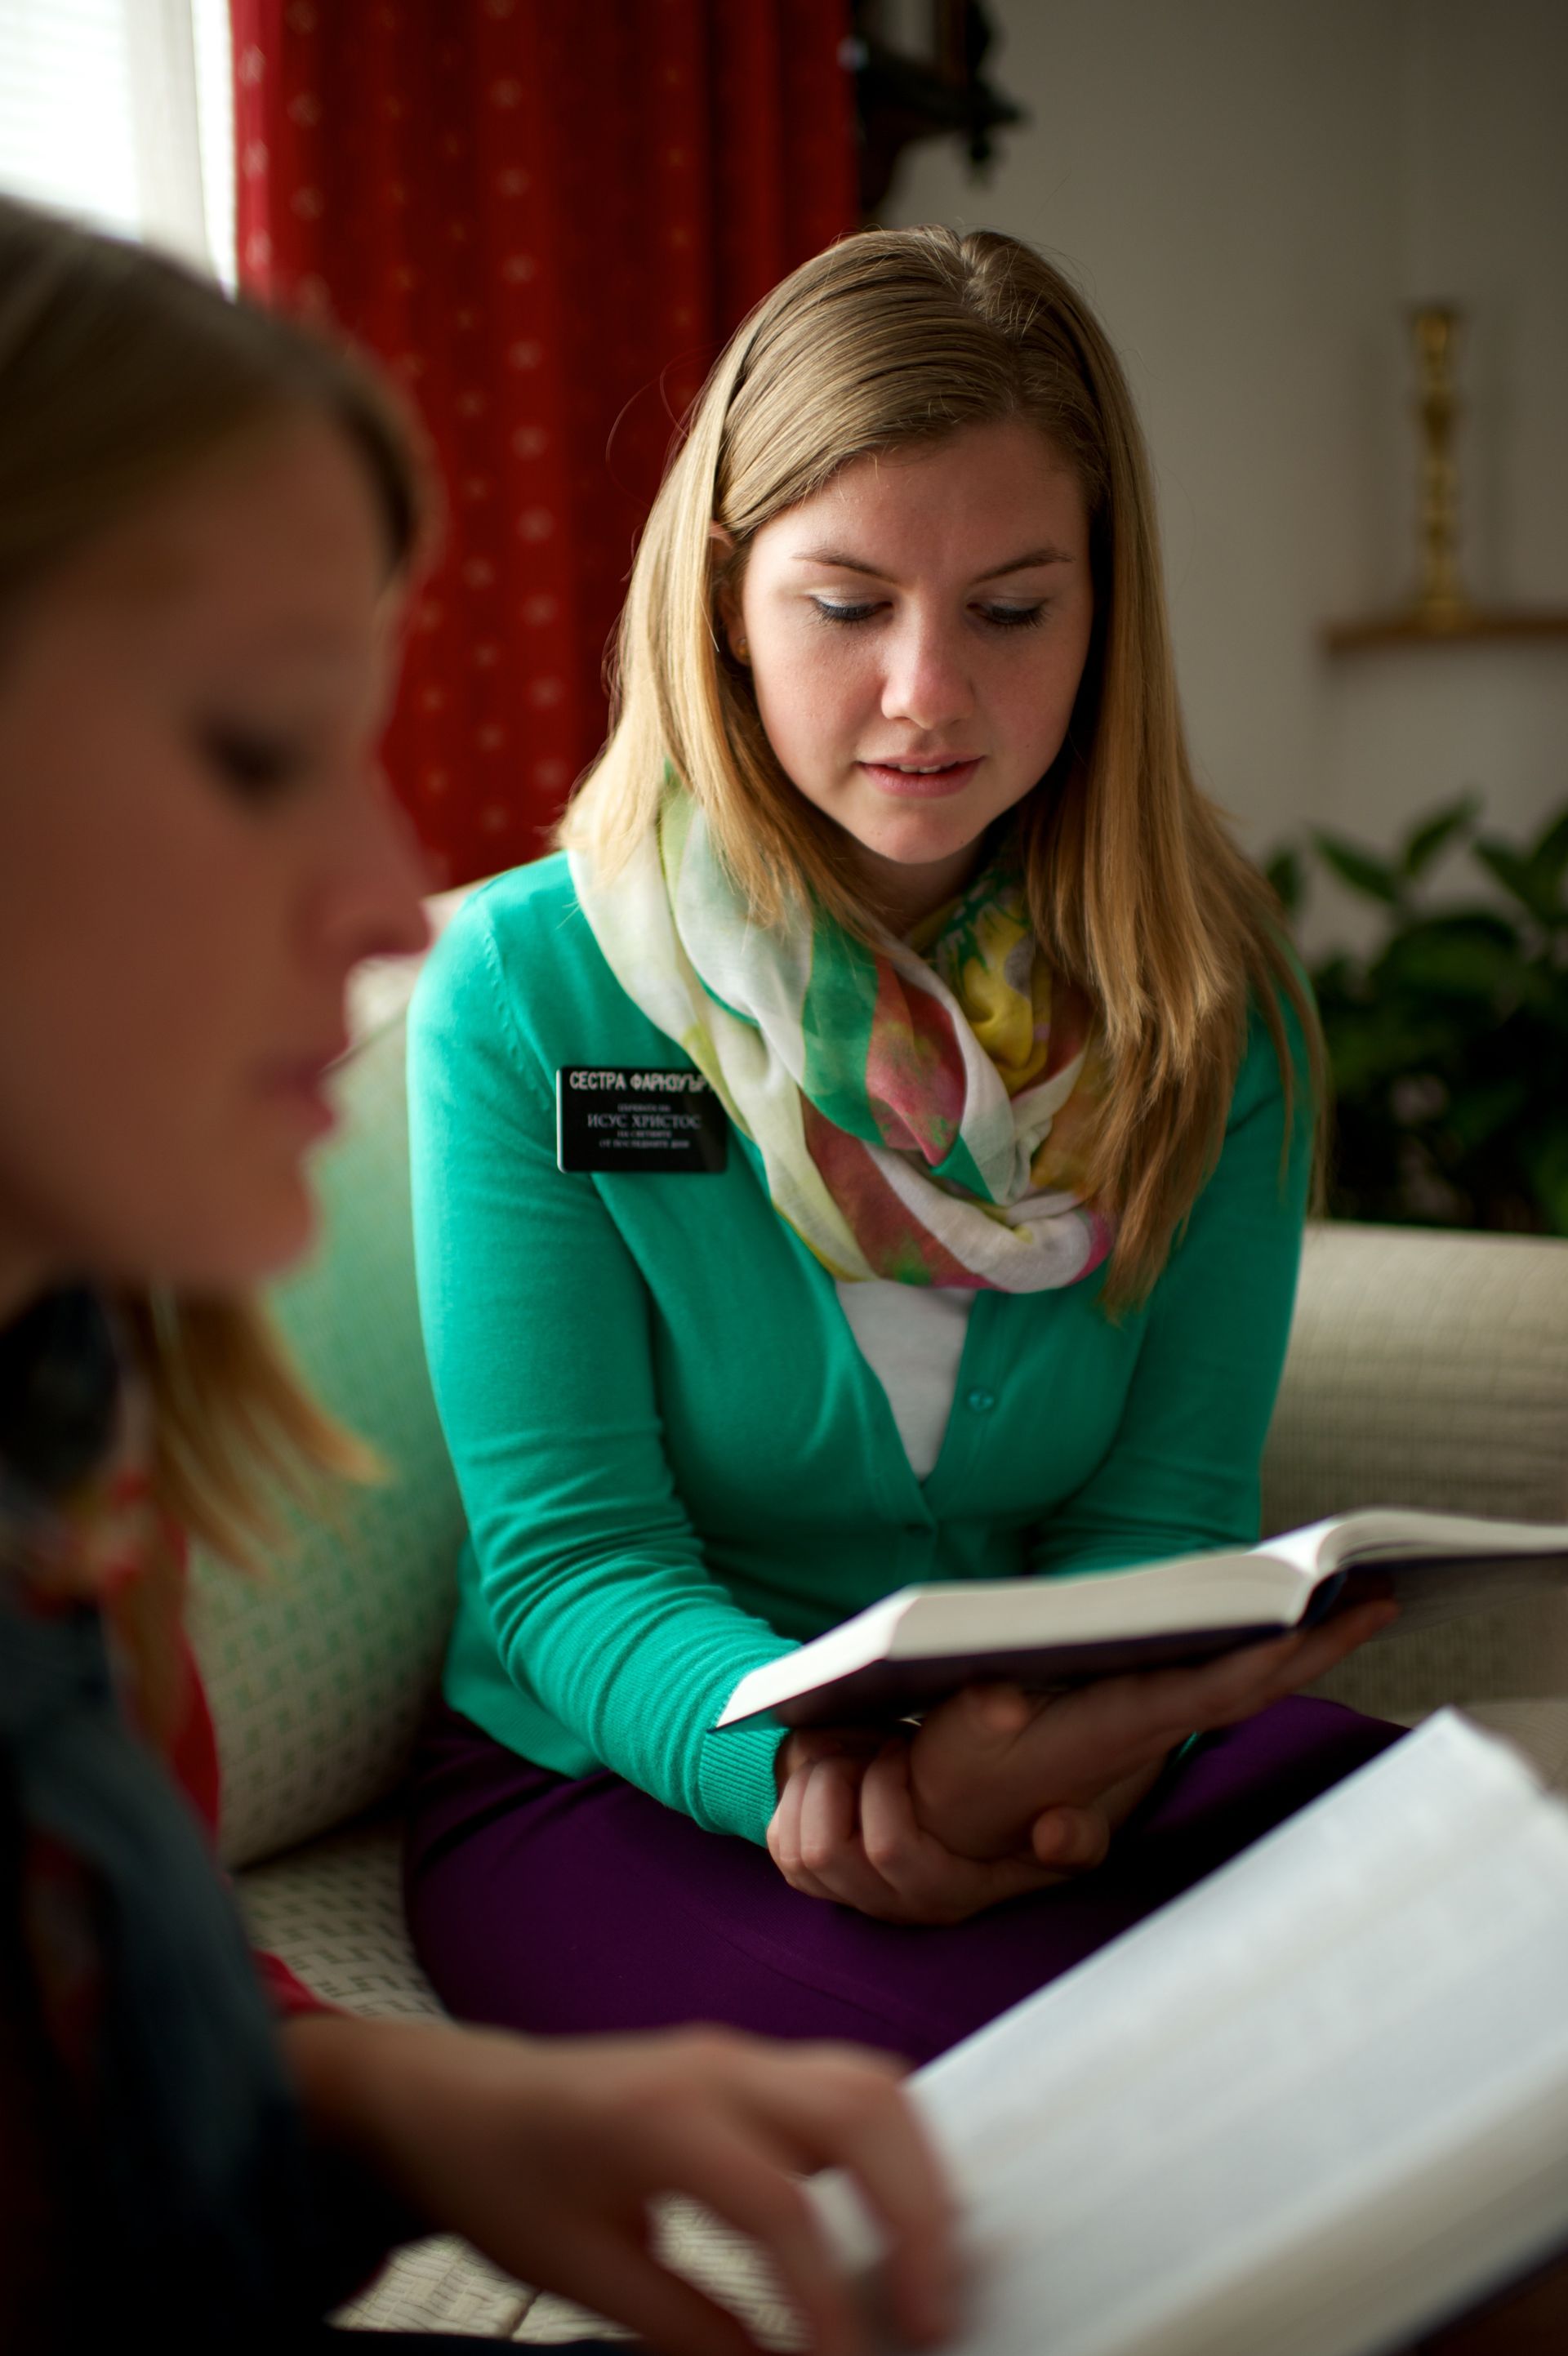 Two sister missionaries sit on a couch and read from their own scriptures.